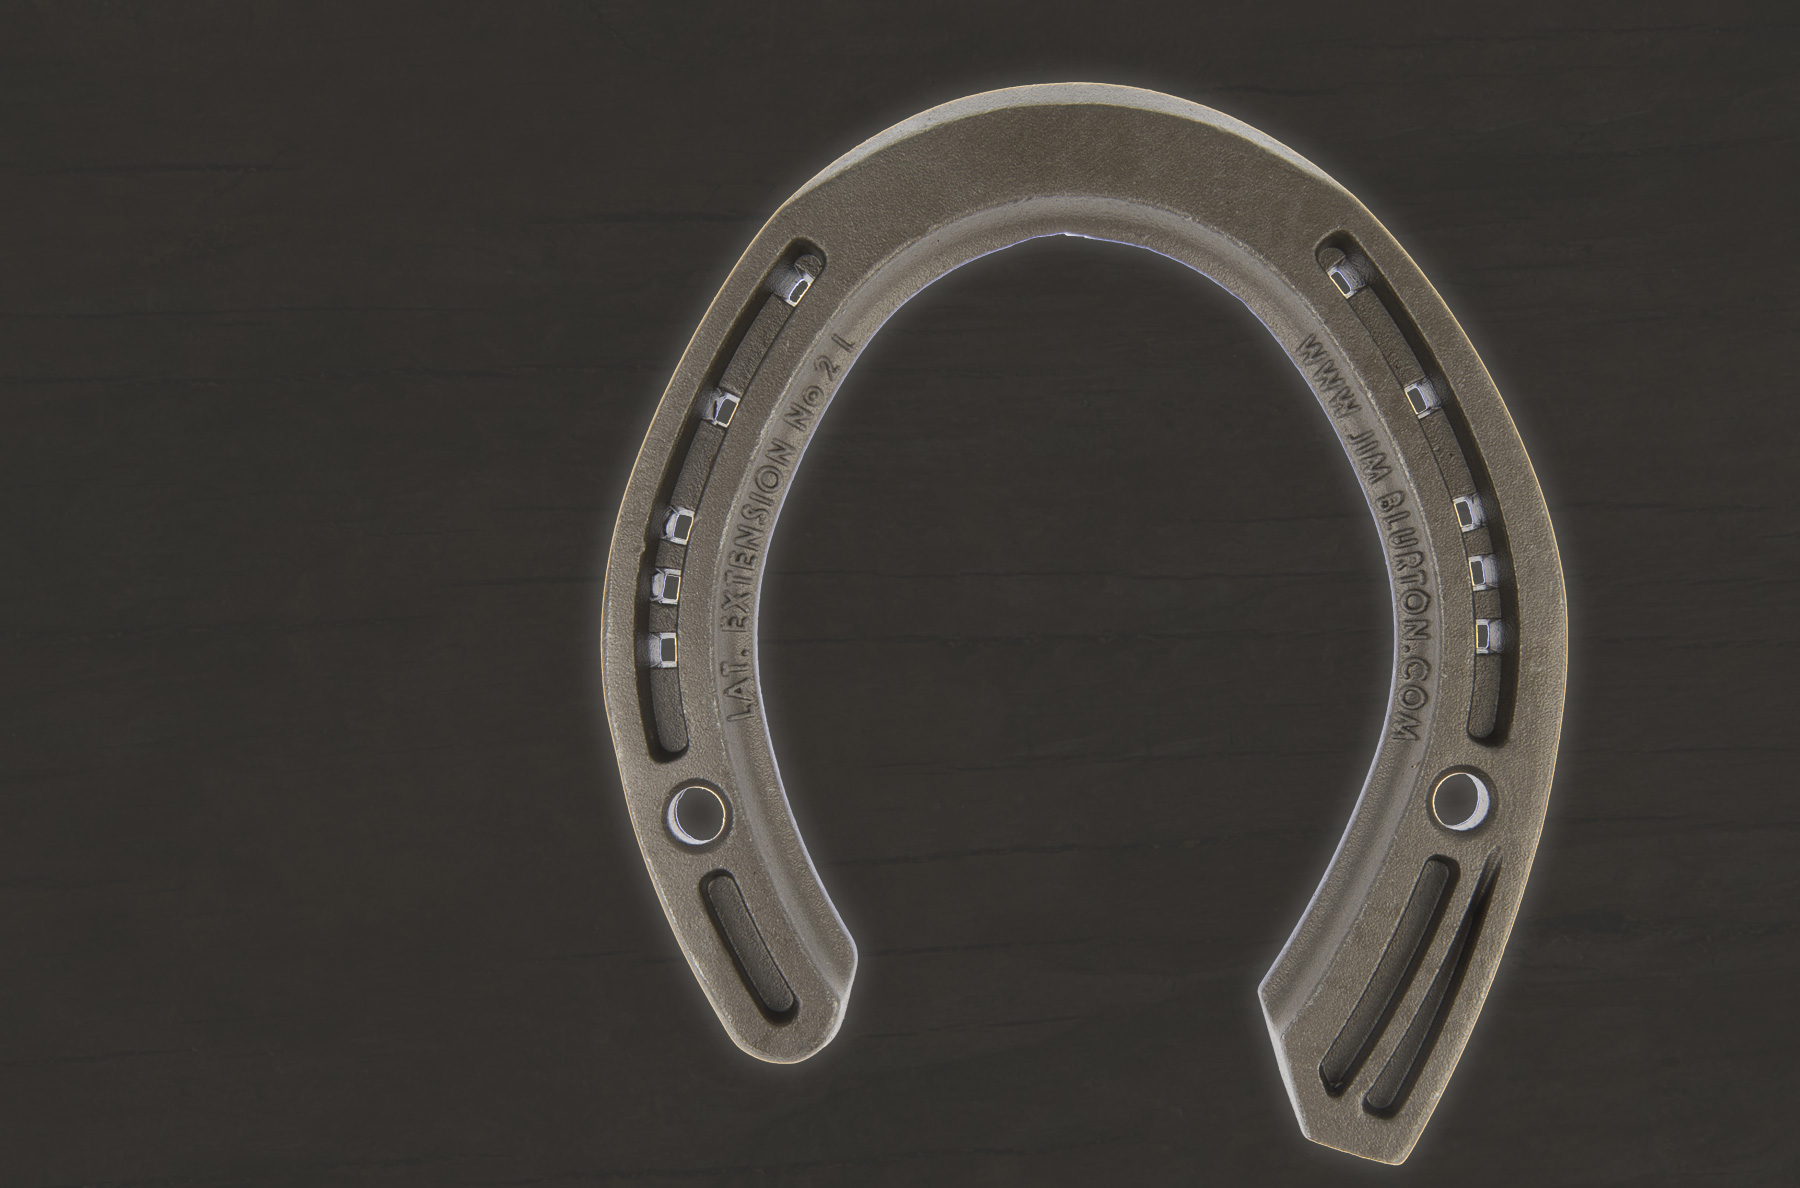 Jim Blurton Lateral Extension - Hind Shoe - Side Clipped, visit the shop to buy online, horseshoes, farrier tools & accessories distributed worldwide.